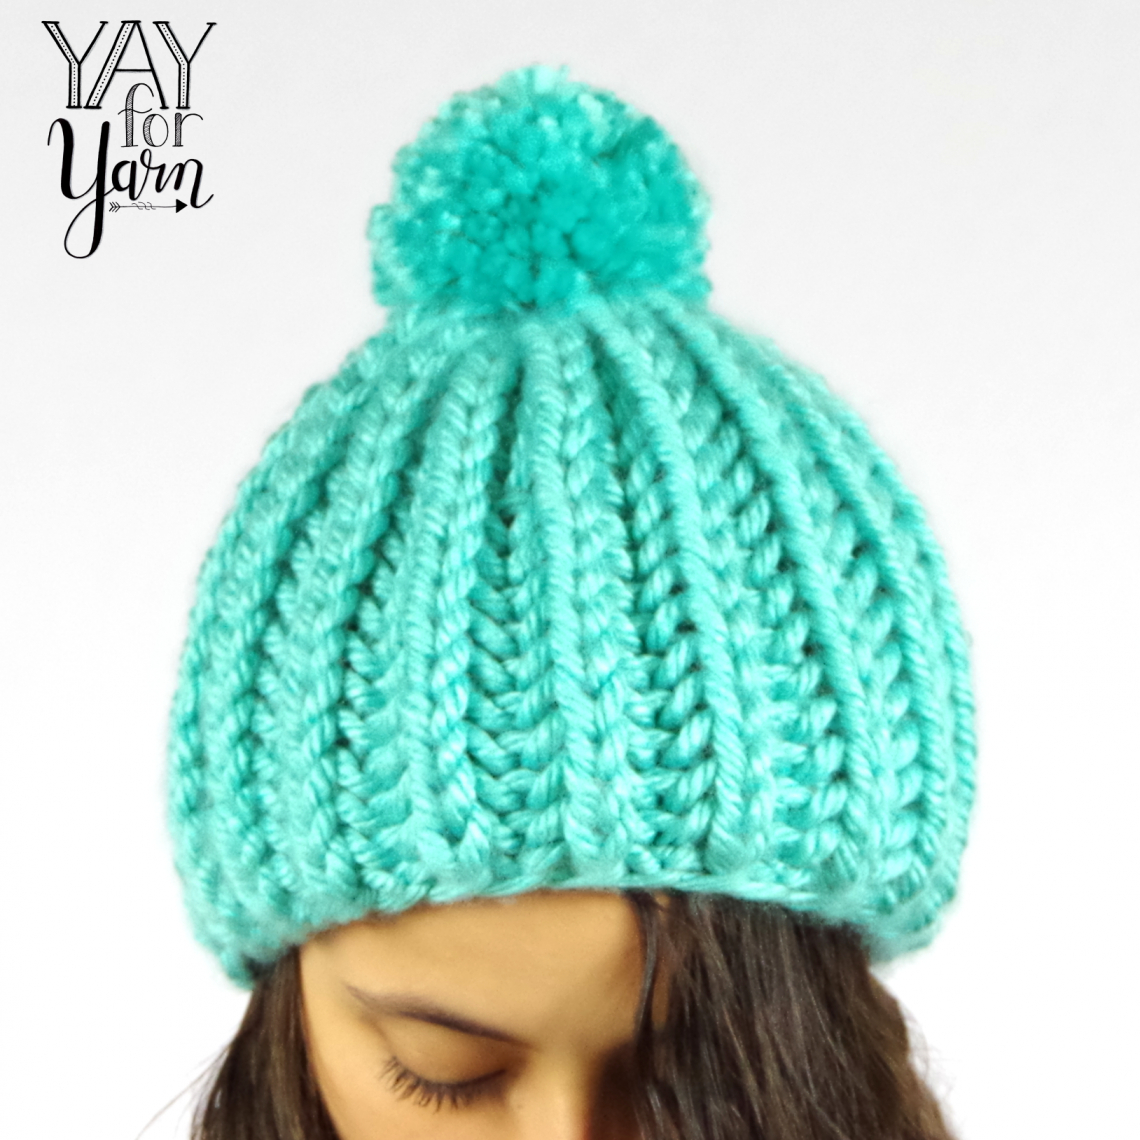 Free Knitting Patterns For Toques Easy Shortcut Brioche Pom Pom Hat Free Knitting Pattern Yay For Yarn